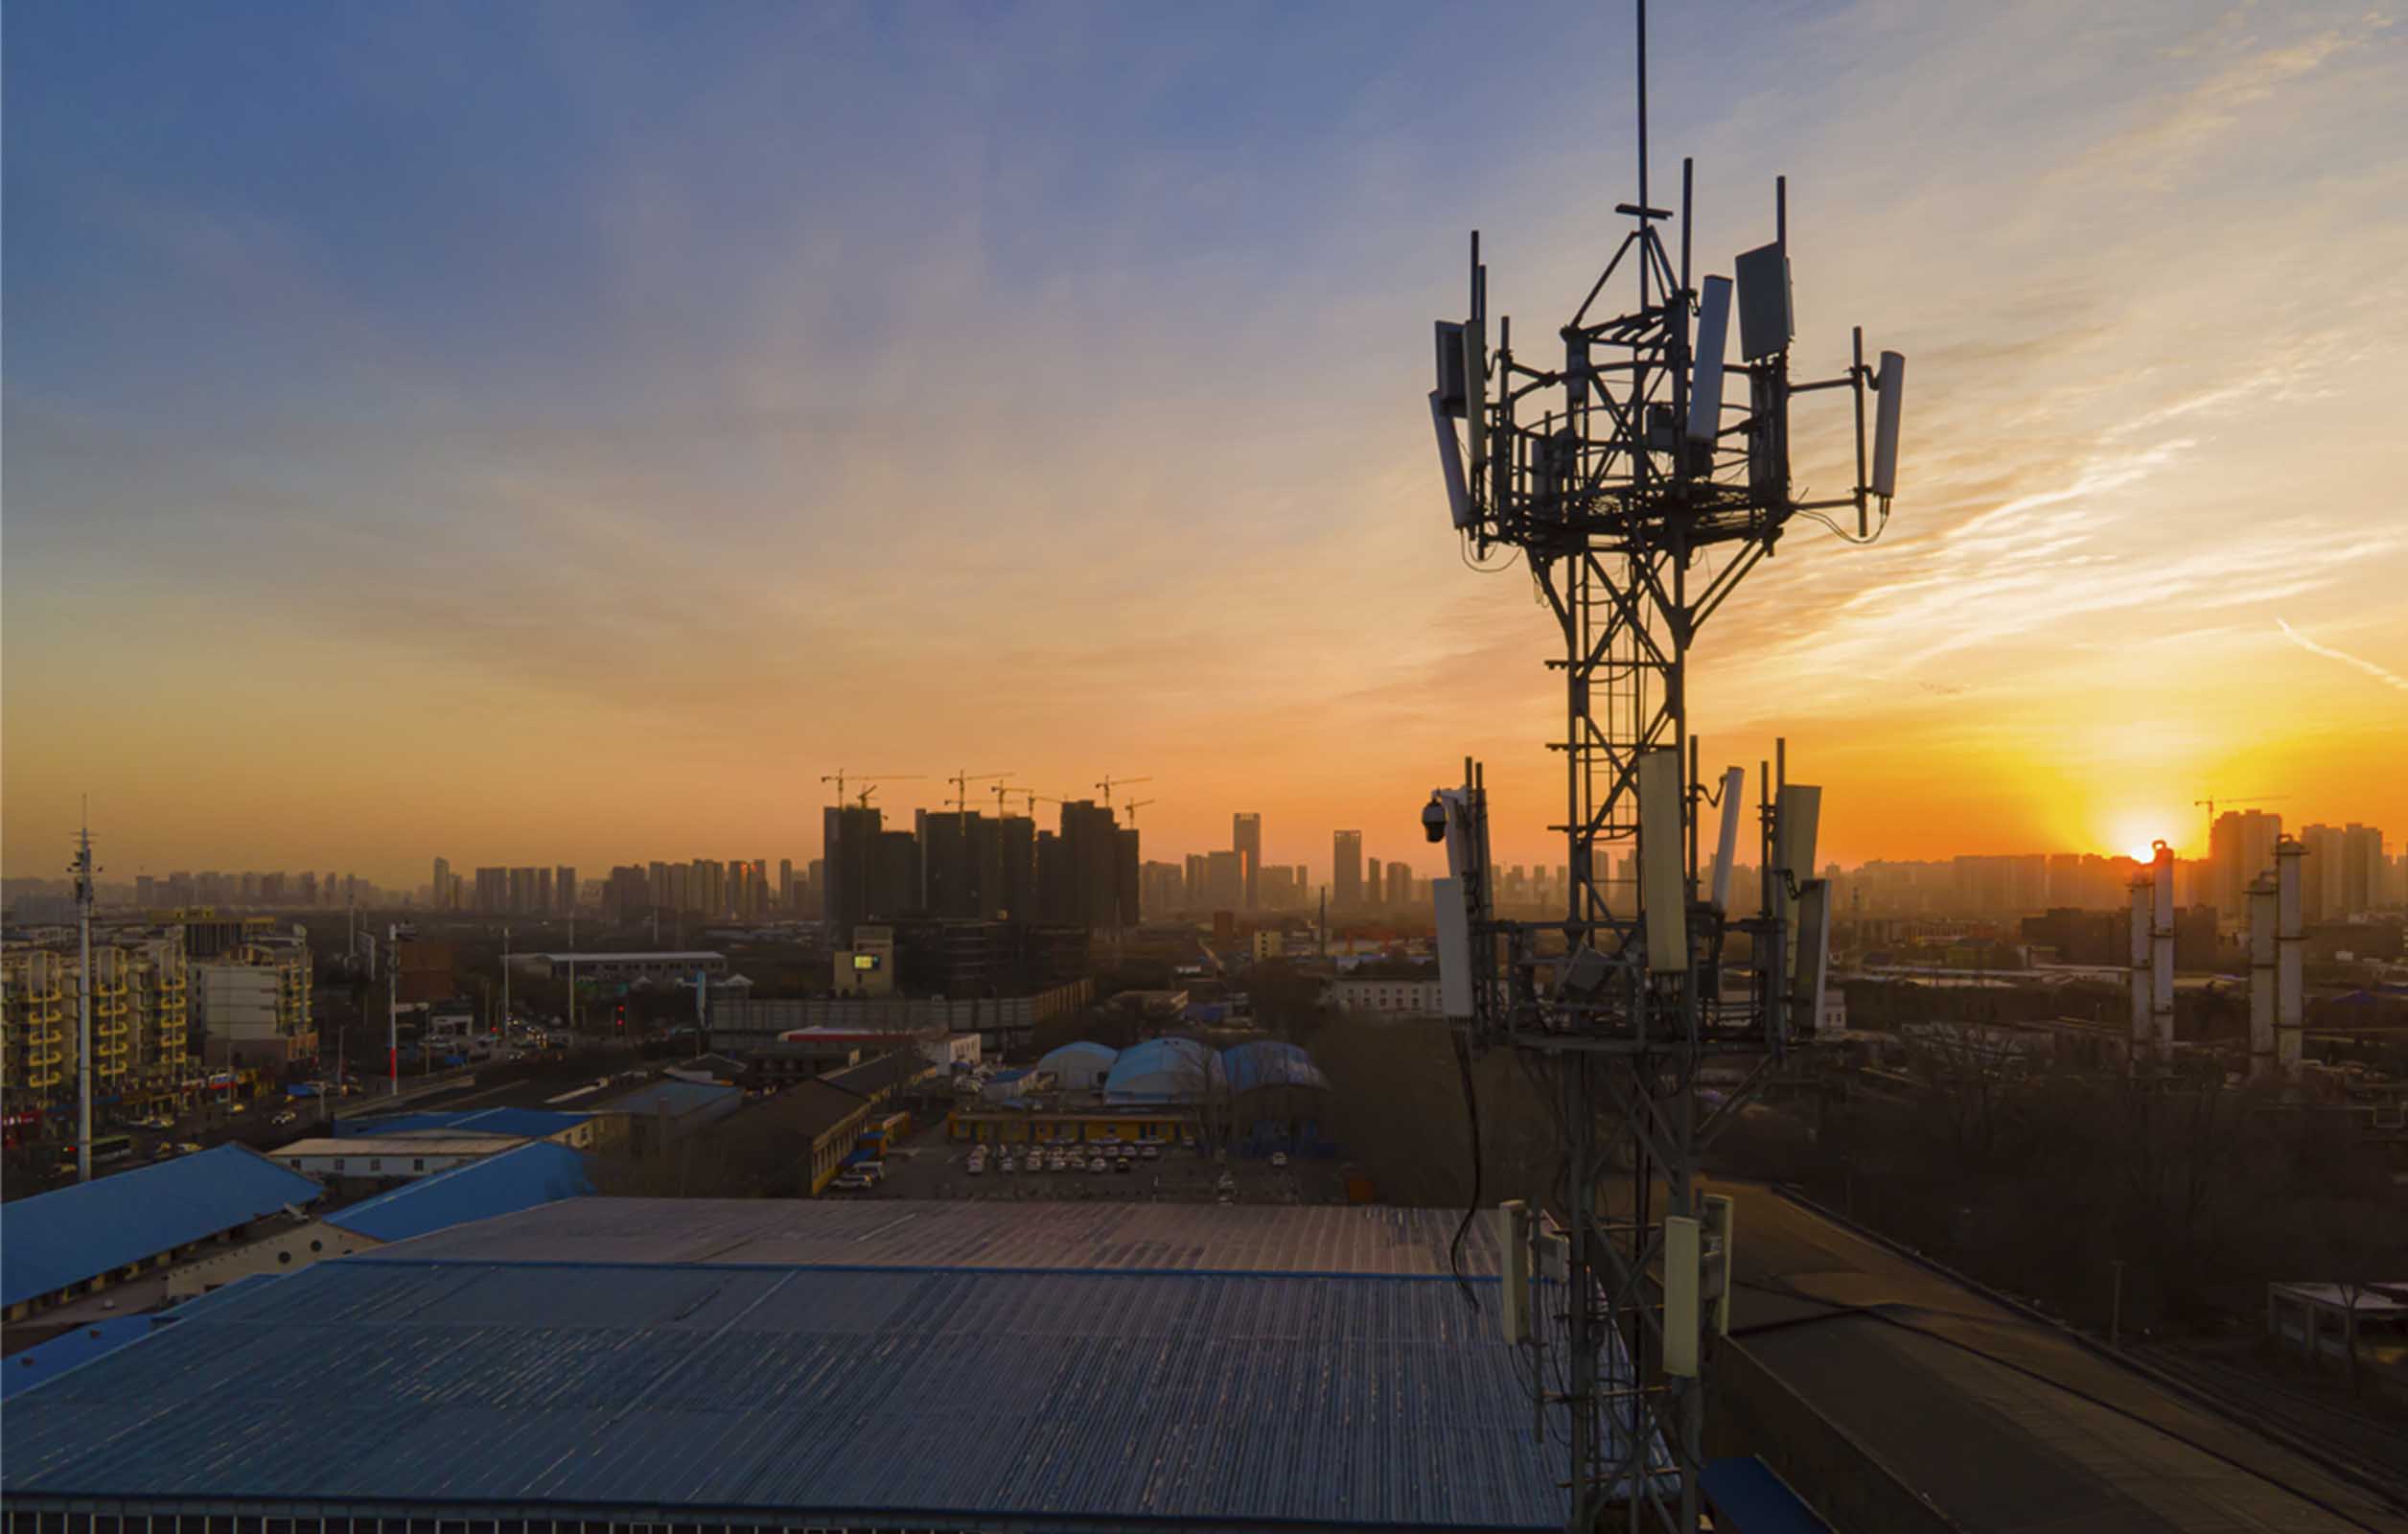 A wide shot of a cell tower against a cityscape sunset